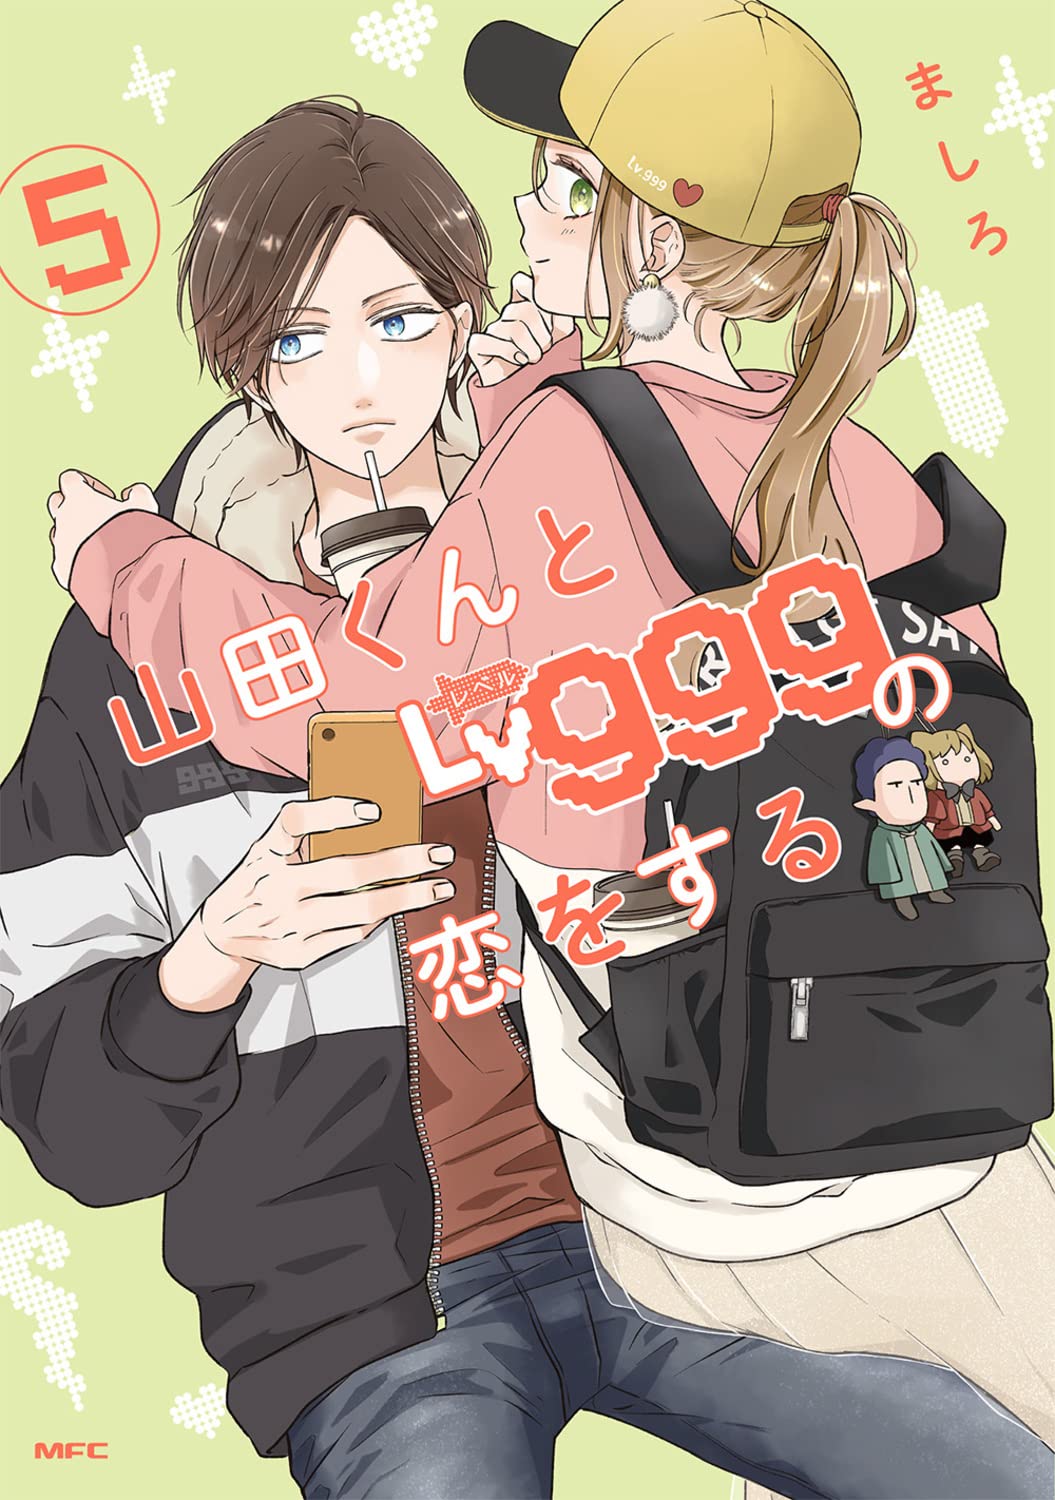 My Love Story with Yamada-Kun at Lv999 Chapter 100: Do we finally have a  love rival for Yamada?